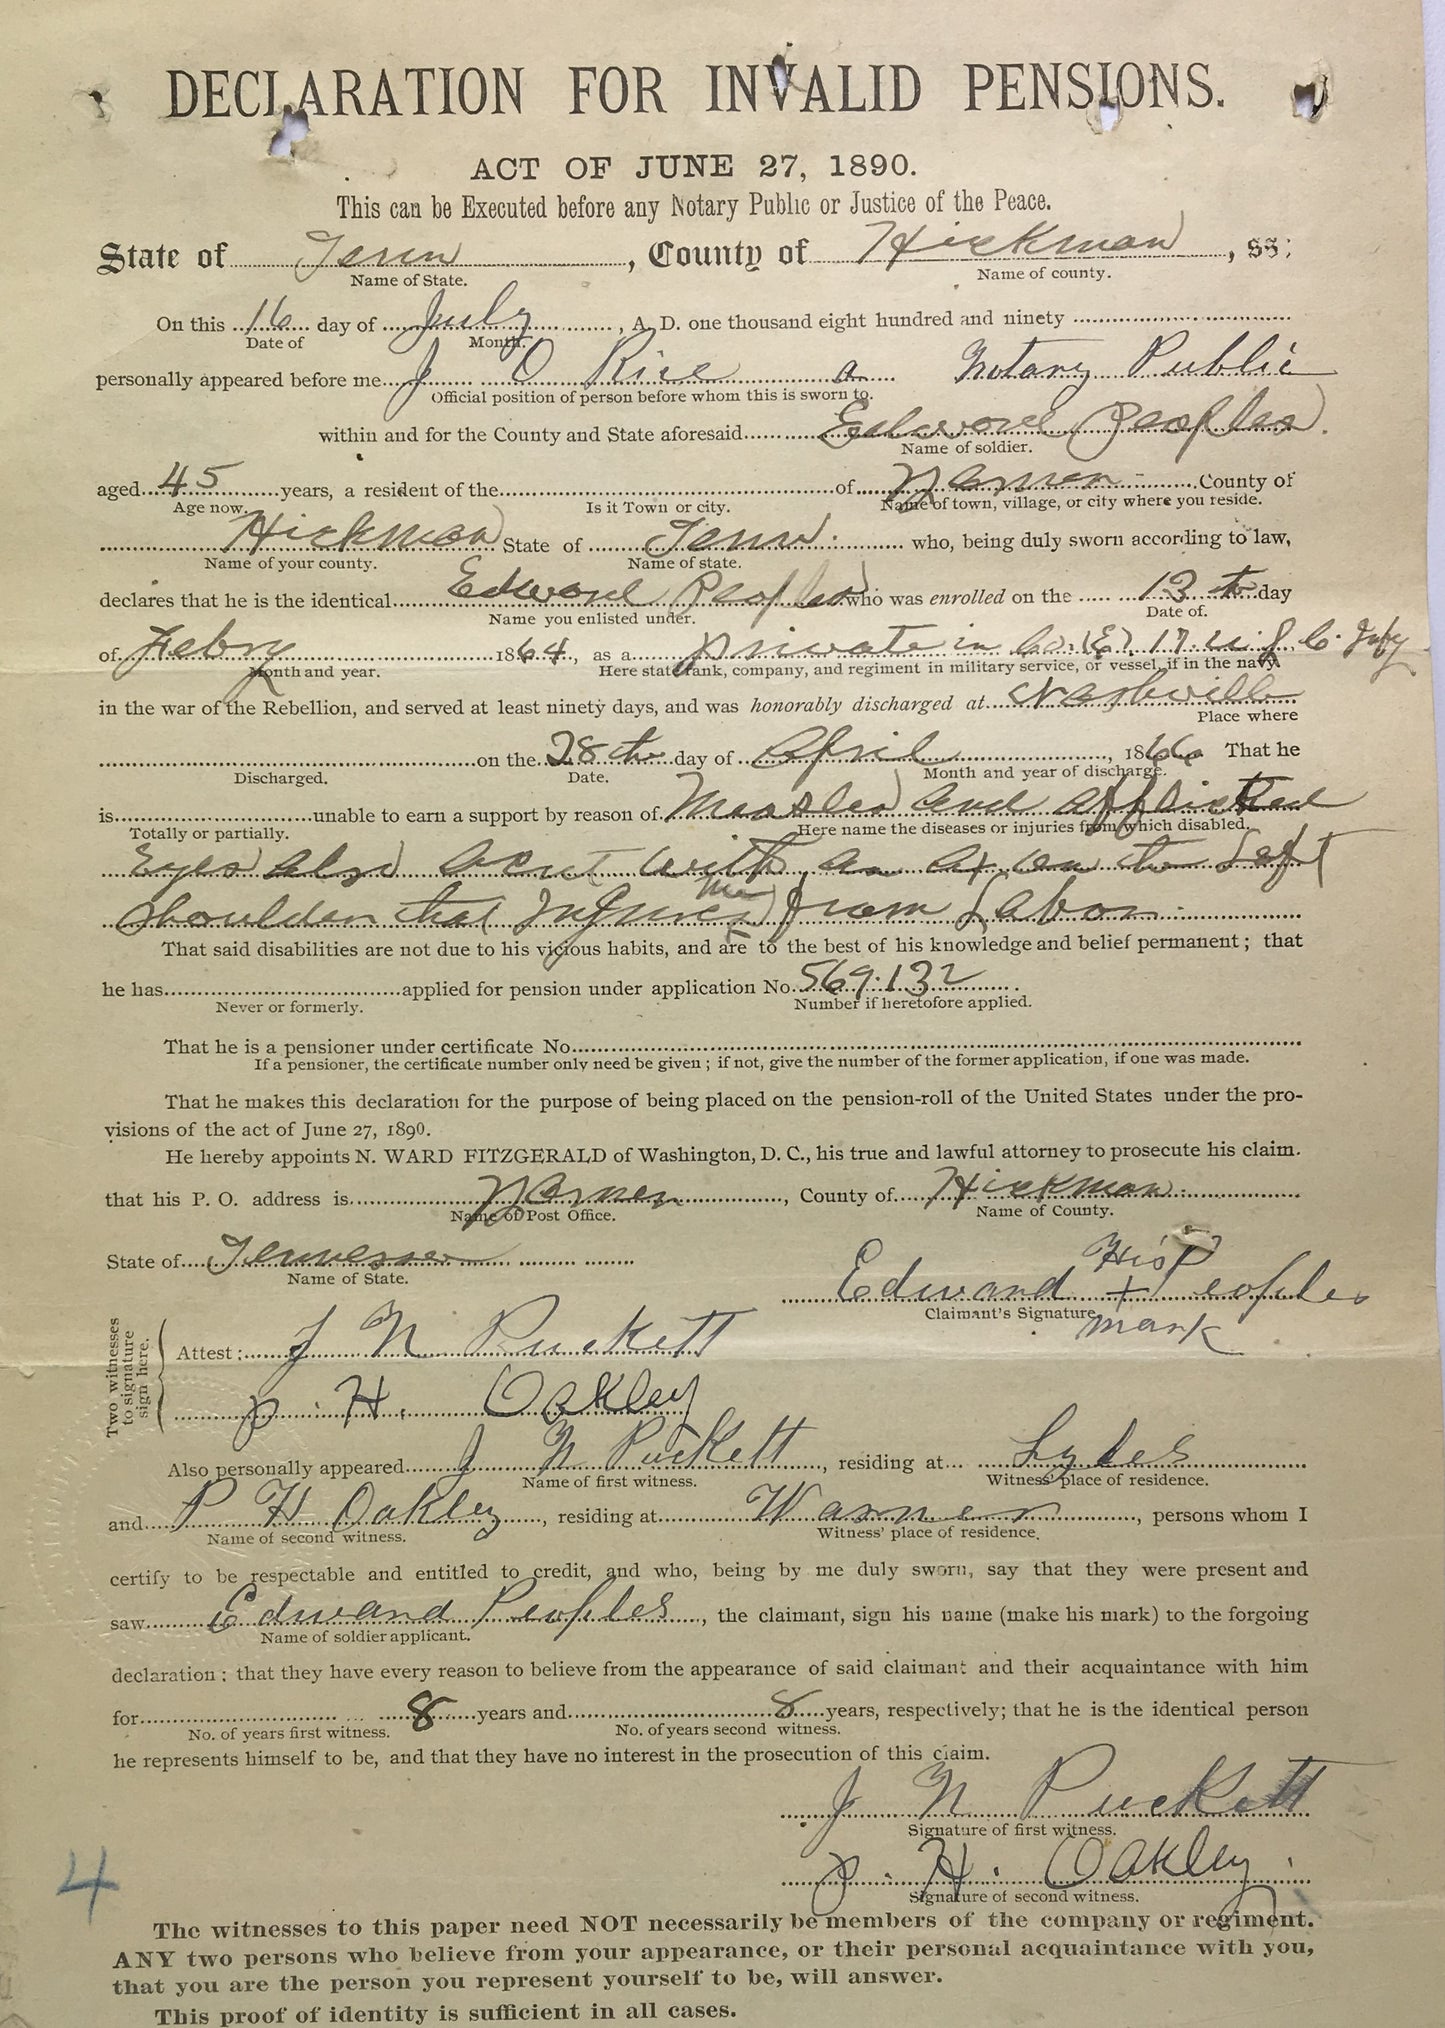 "The Basics" Full Civil War Pension File and Compiled Service Records